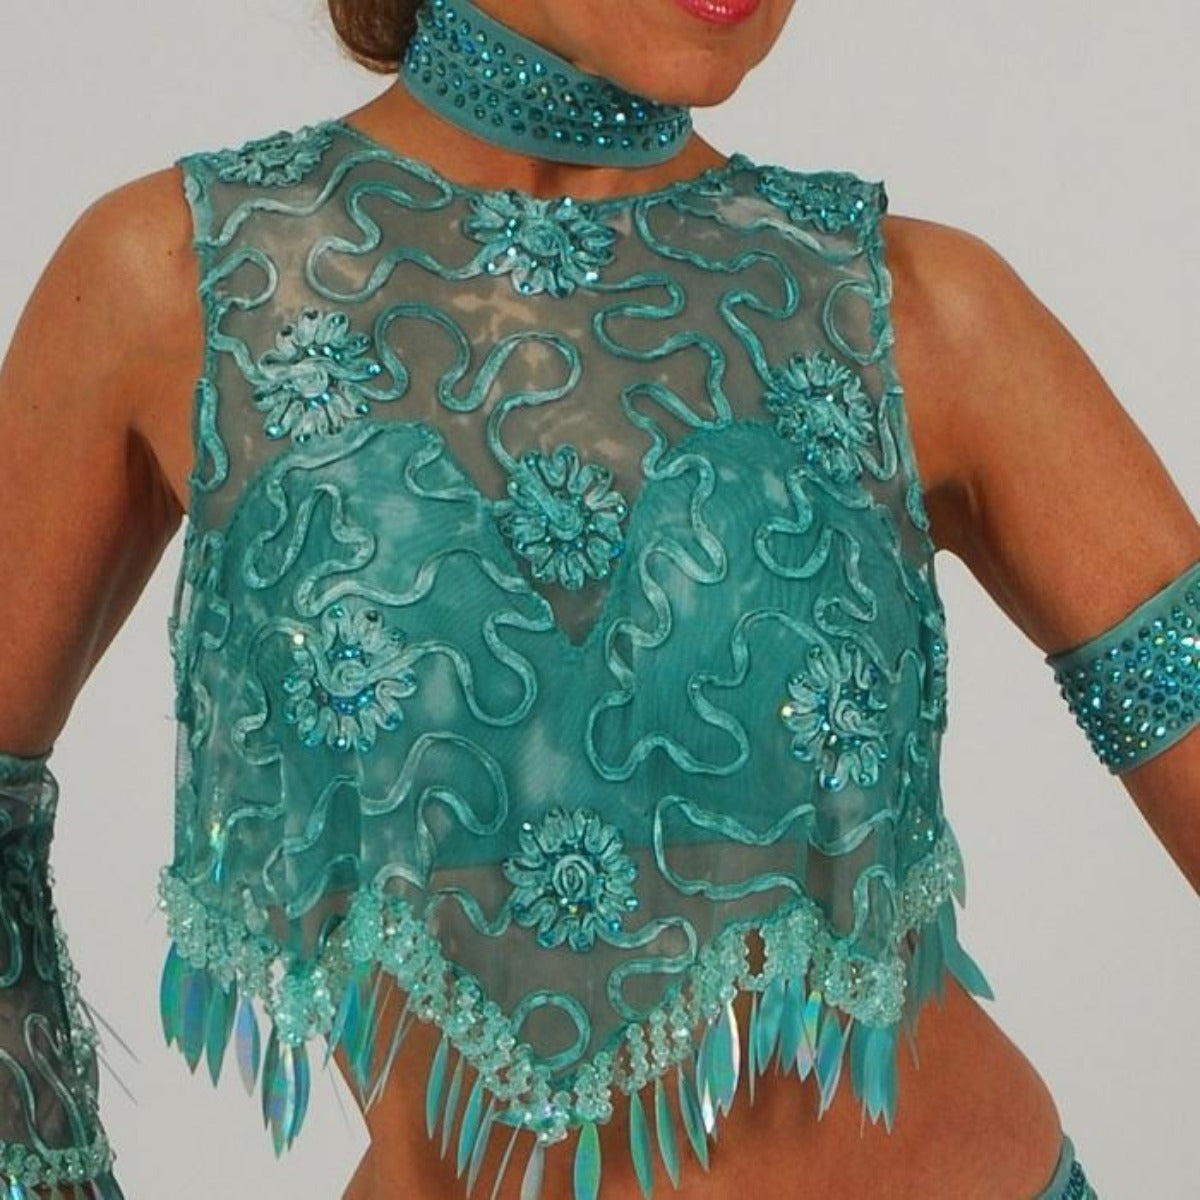 Crystal's Creations close up view of Gorgeous aqua Latin/rhythm two piece dance dress created of gorgeous aqua soutache lace fabric, embellished with about 10 gross of Aqua AB Swarovski stones with lots of hand beading & paillettes.